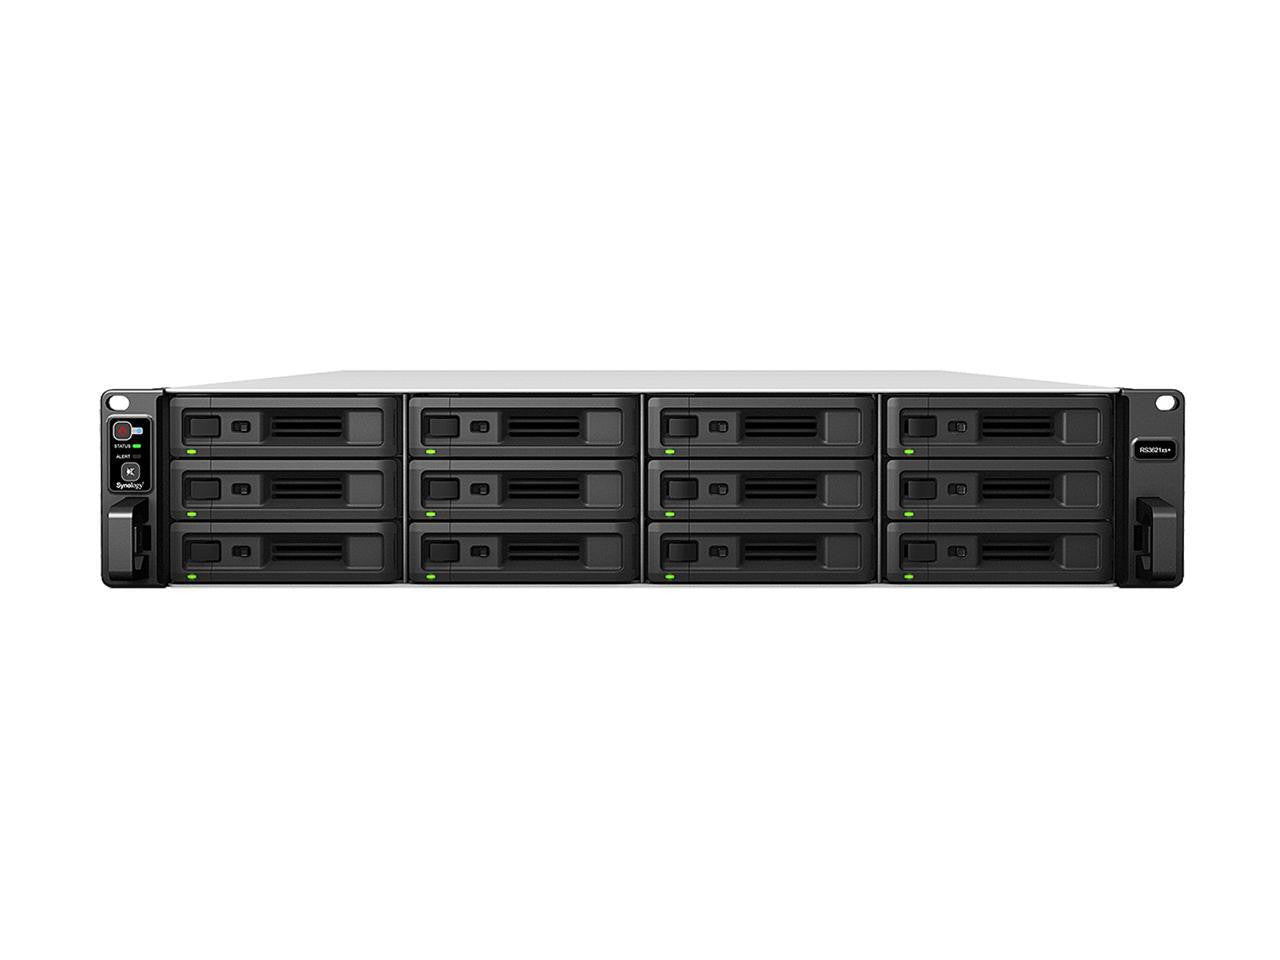 RS3621xs+ 12-BAY RackStation with 16GB RAM and 96TB (12 x 8TB) of Synology Enterprise Drives